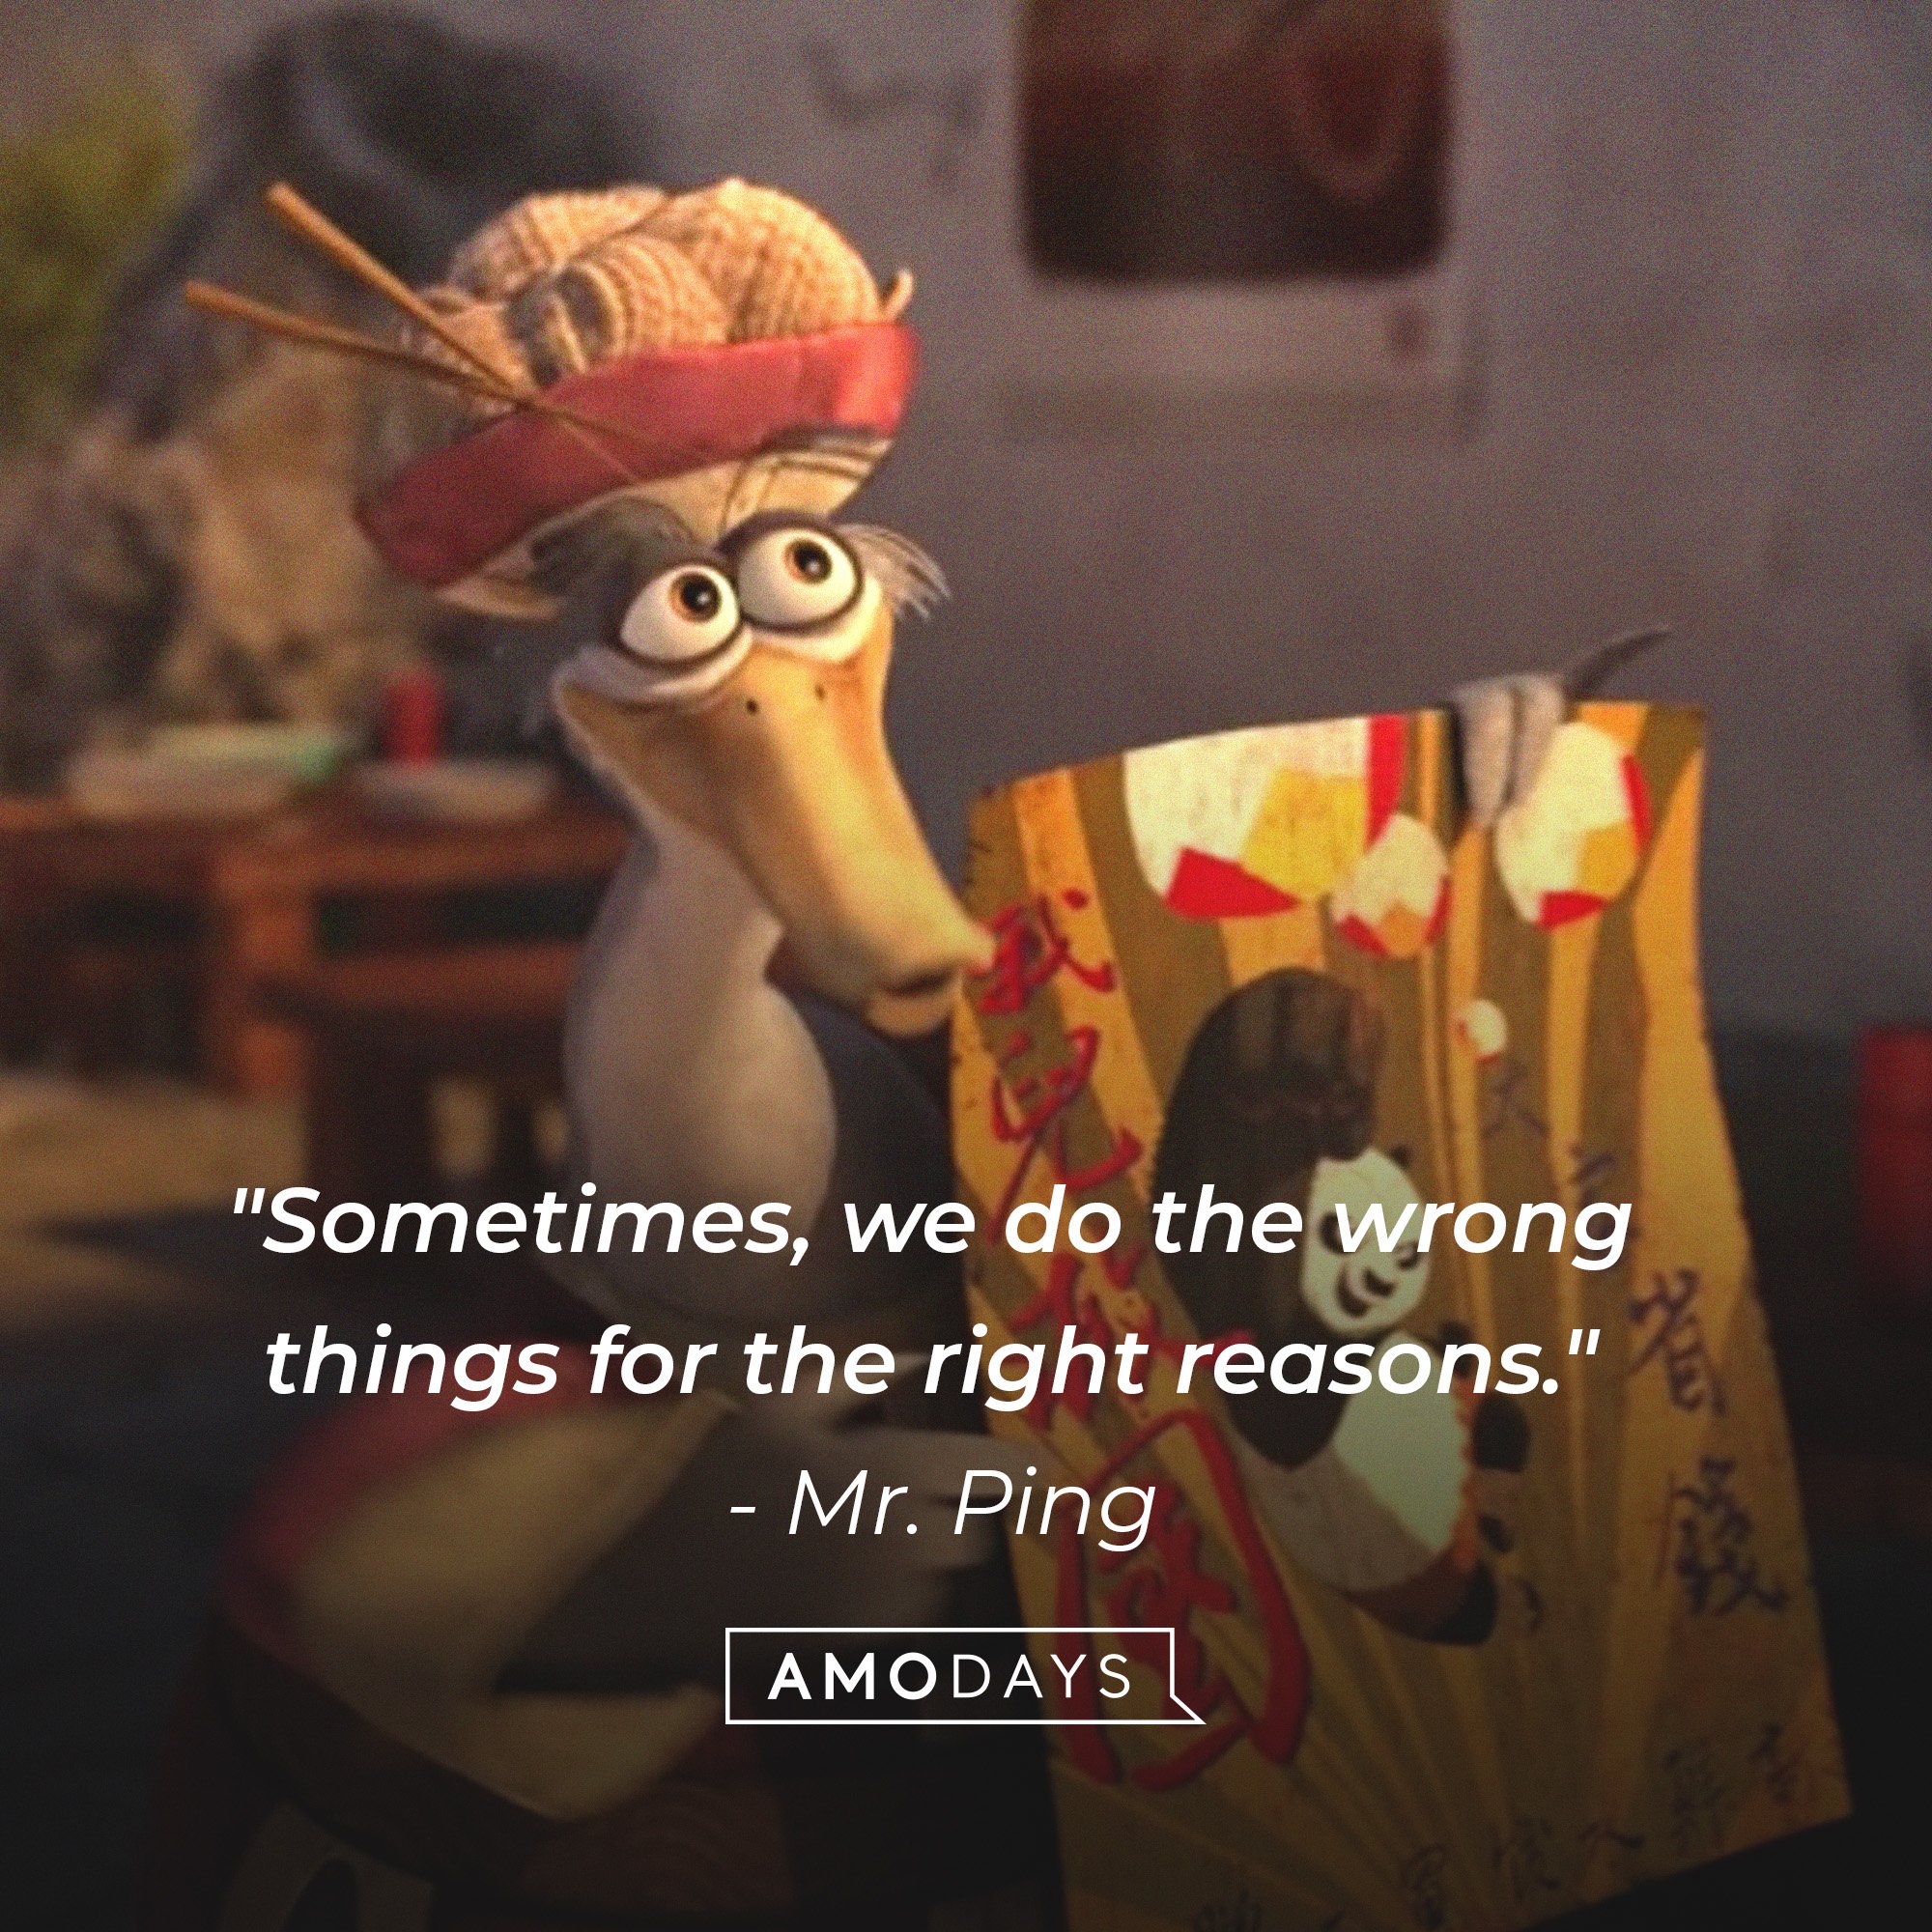 Mr. Ping’s quote: "Sometimes, we do the wrong things for the right reasons."  | Image: AmoDays